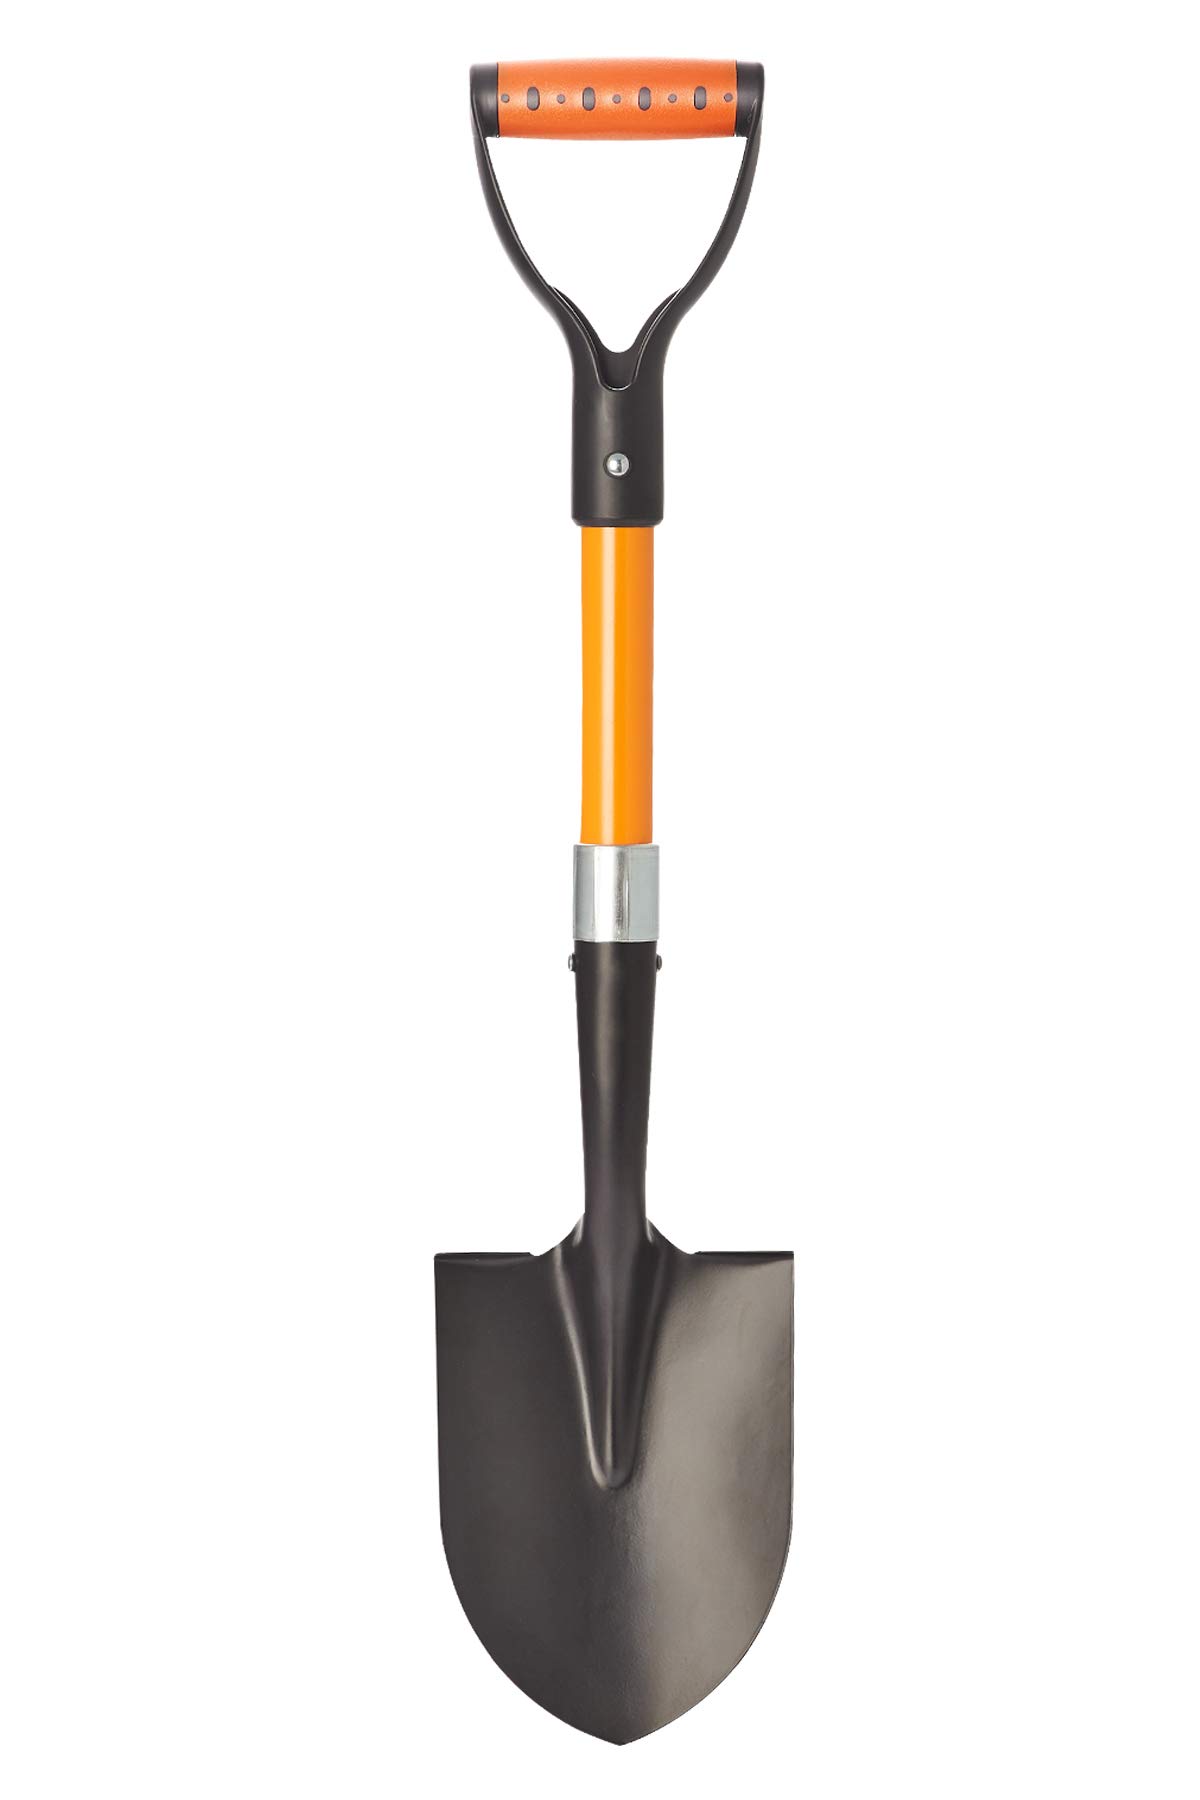 nn Small garden Shovel Mini Kids Digging Shovel with Overall Length 28 inches Shovel for Digging, Beach Shovels gardening Tools wit